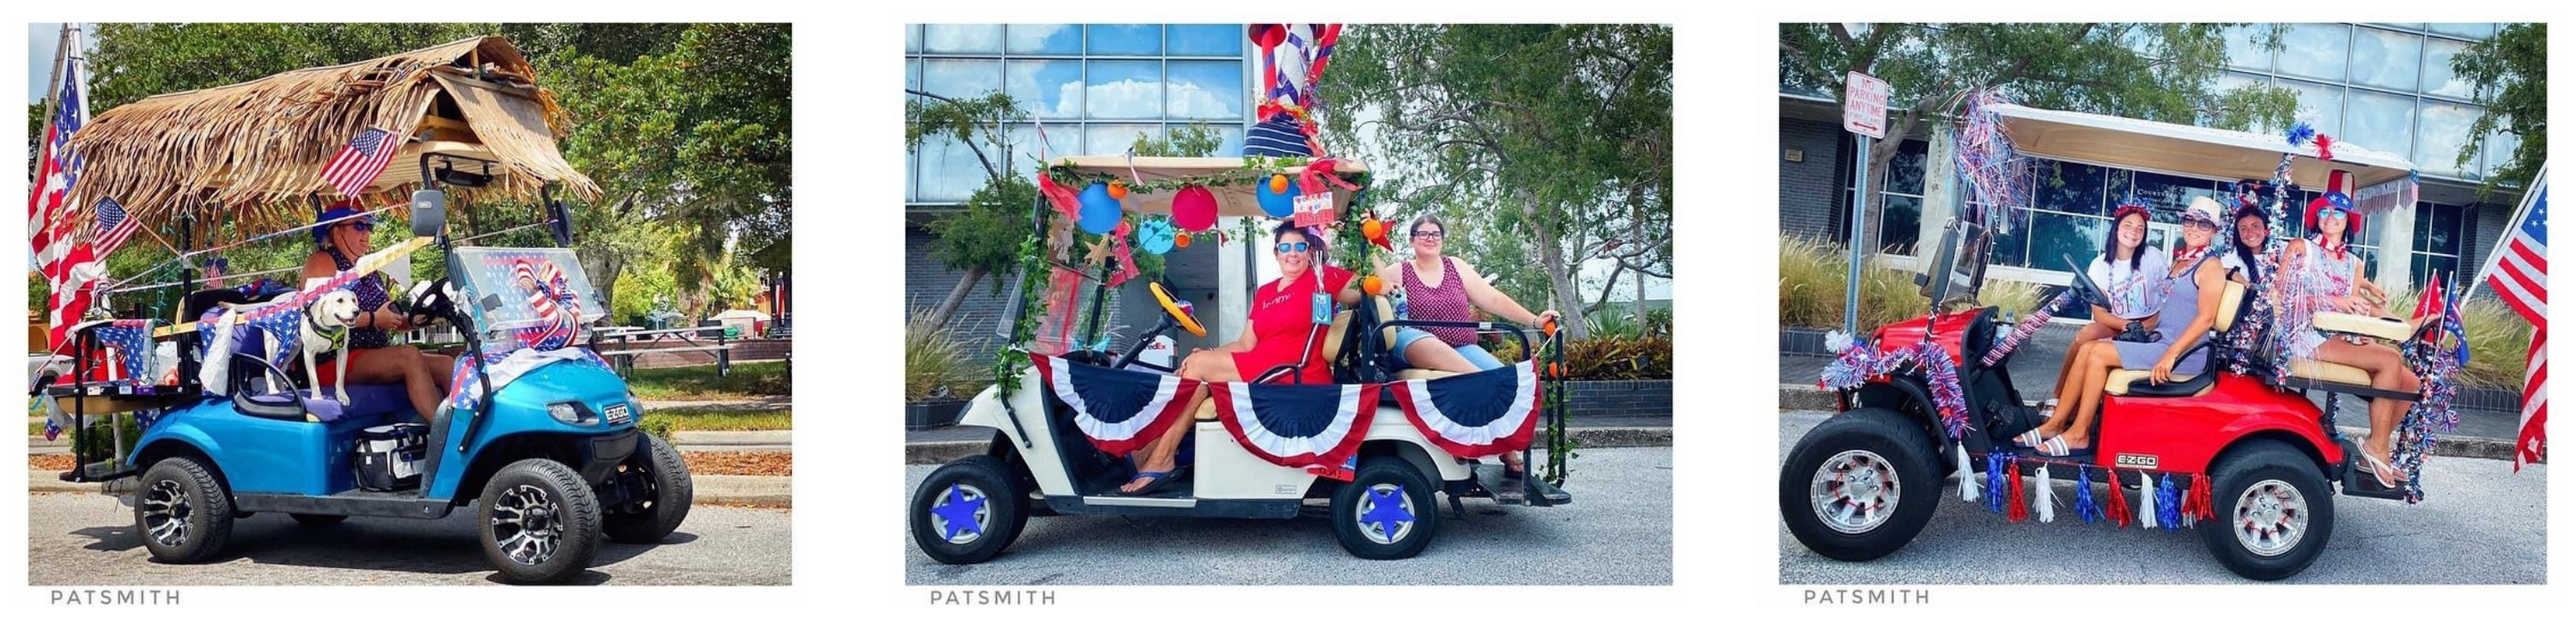 Three separate images of golf carts, each dressed in patriotic decorations.